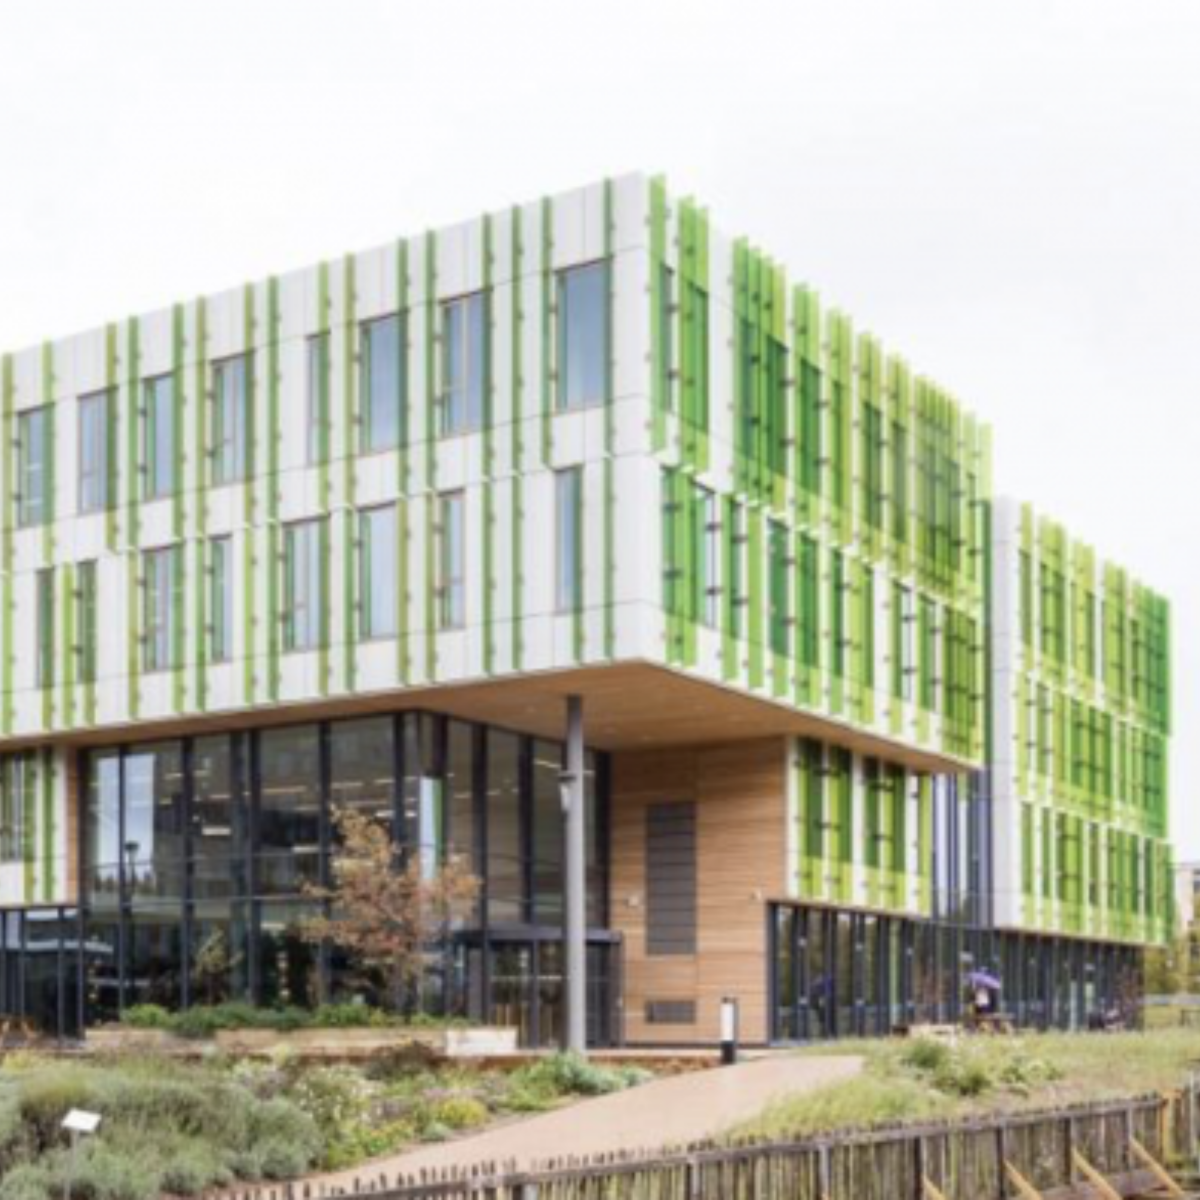 L’Oréal moves its Netherlands headquarters to sustainable and human-centric Park 20|20